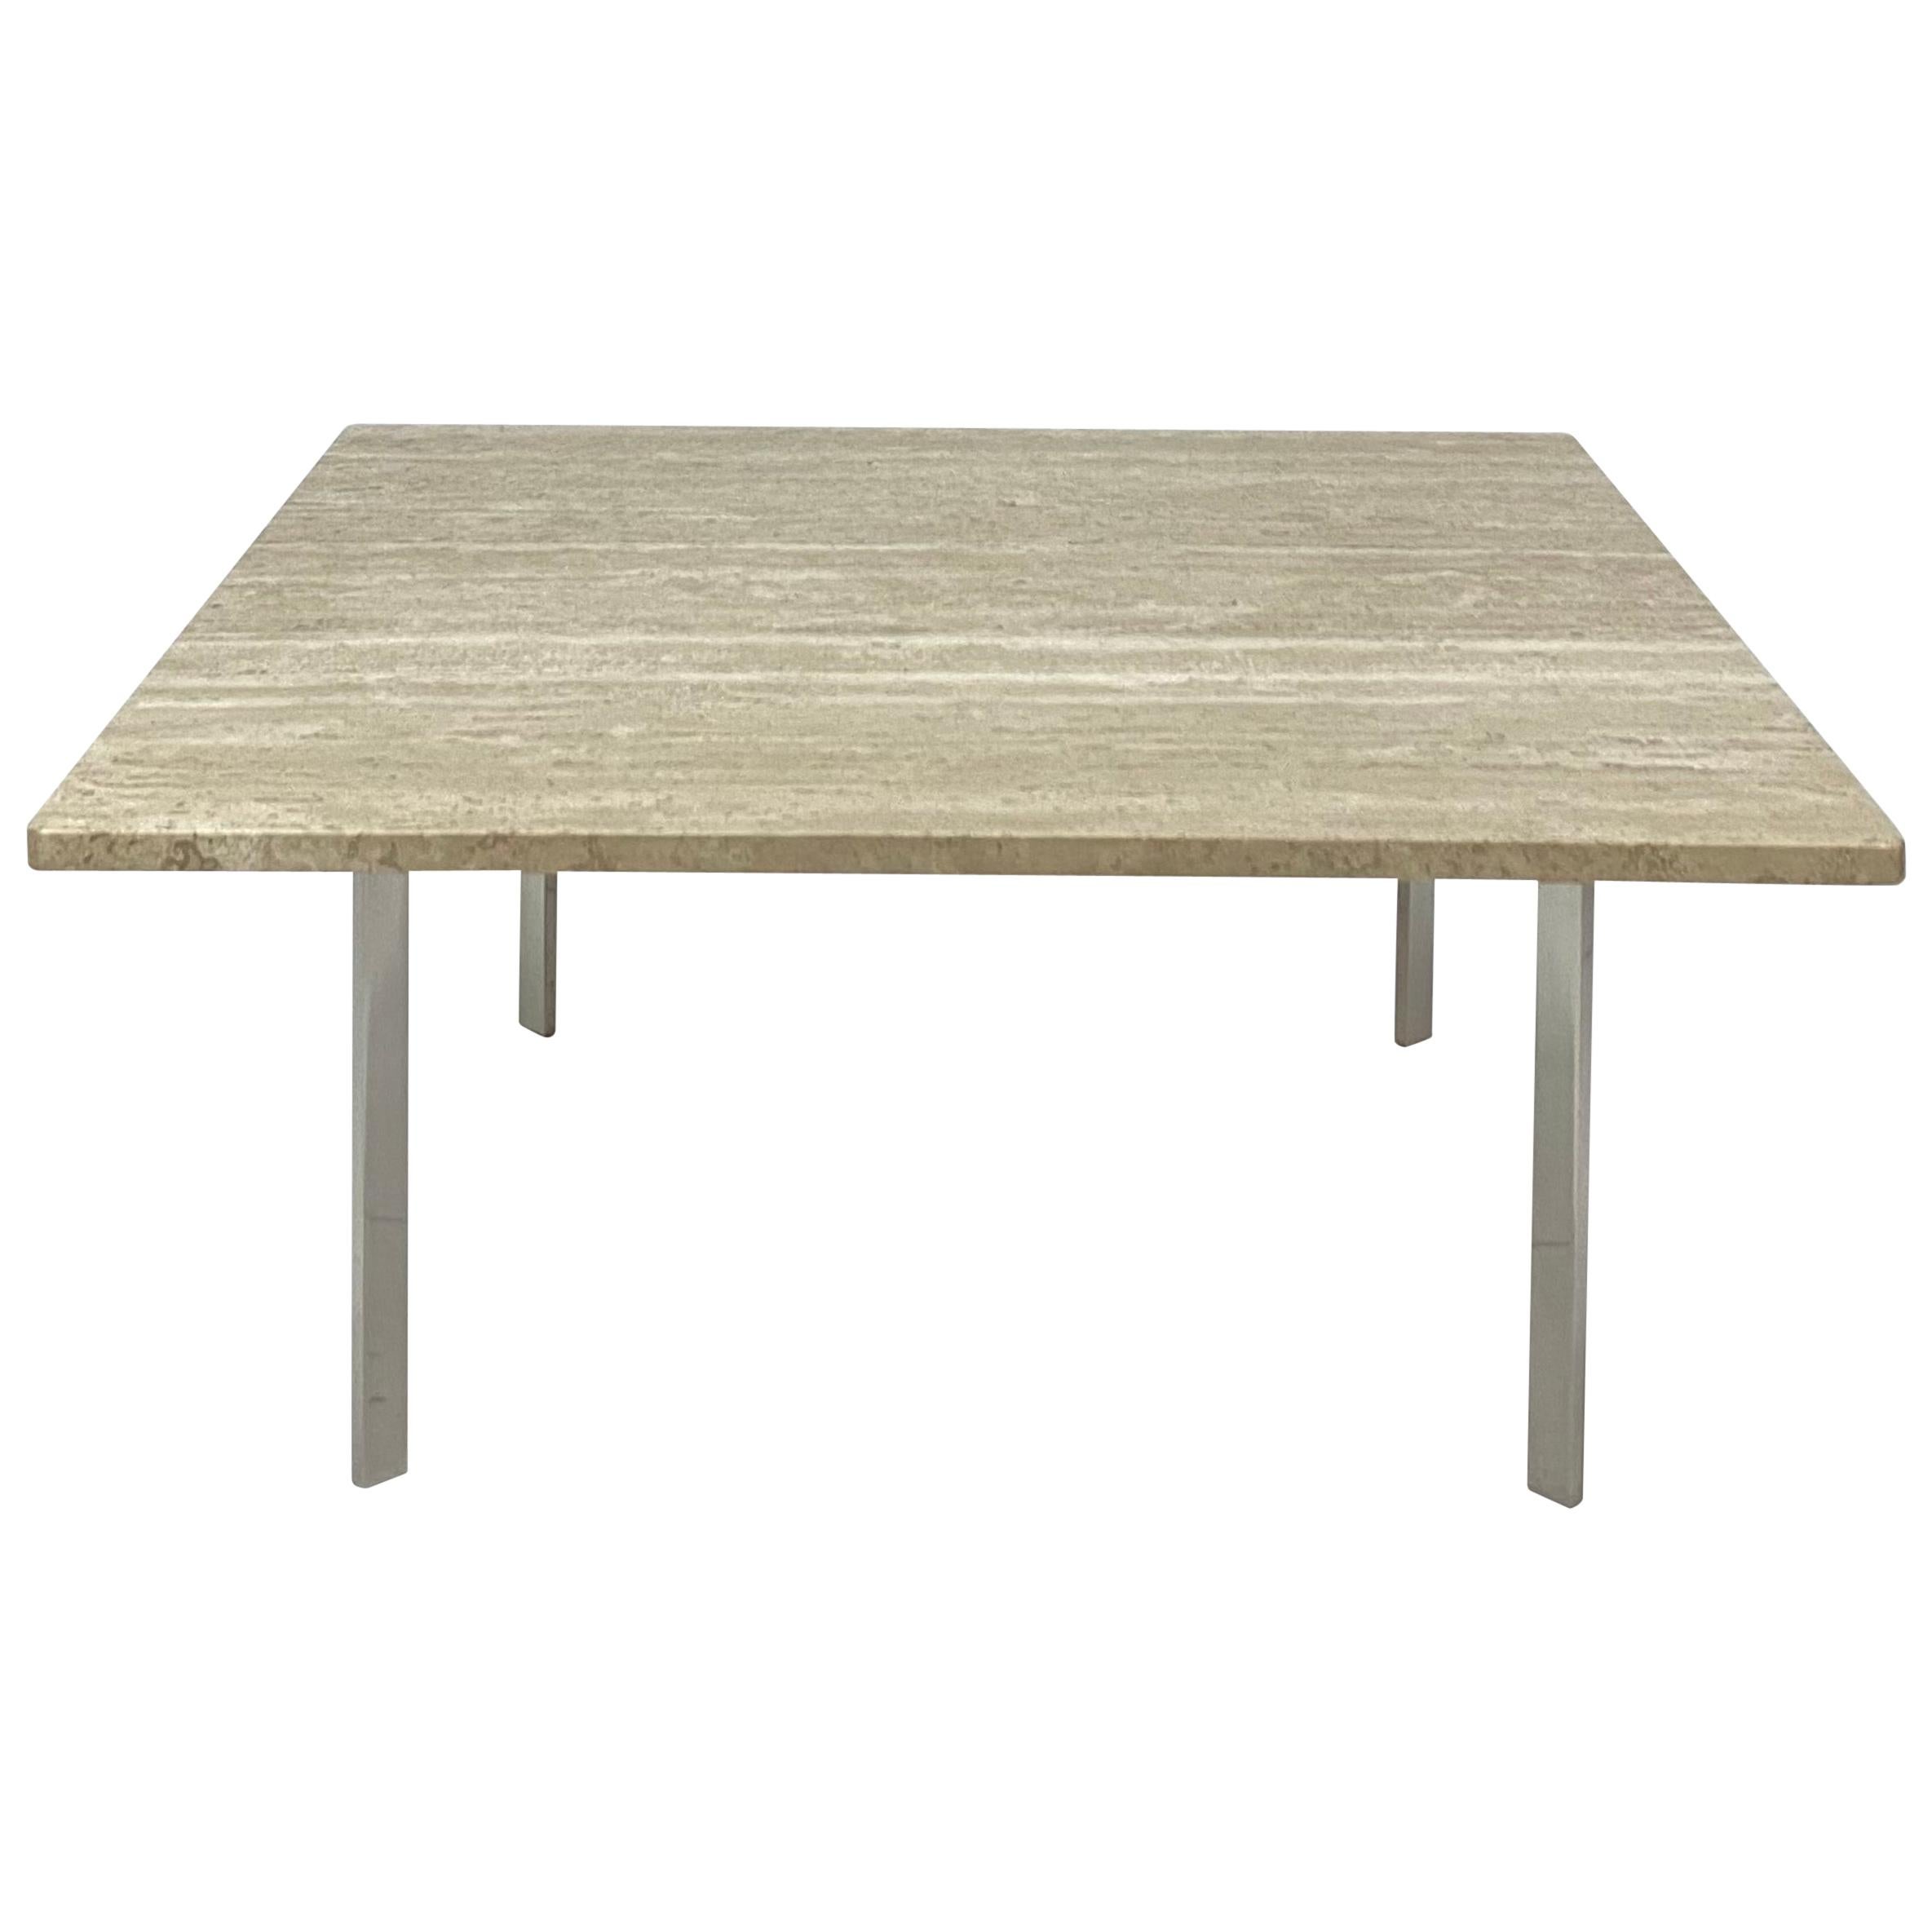 Mies Van Der Rohe Barcelona Table with Custom Travertine Top for Knoll